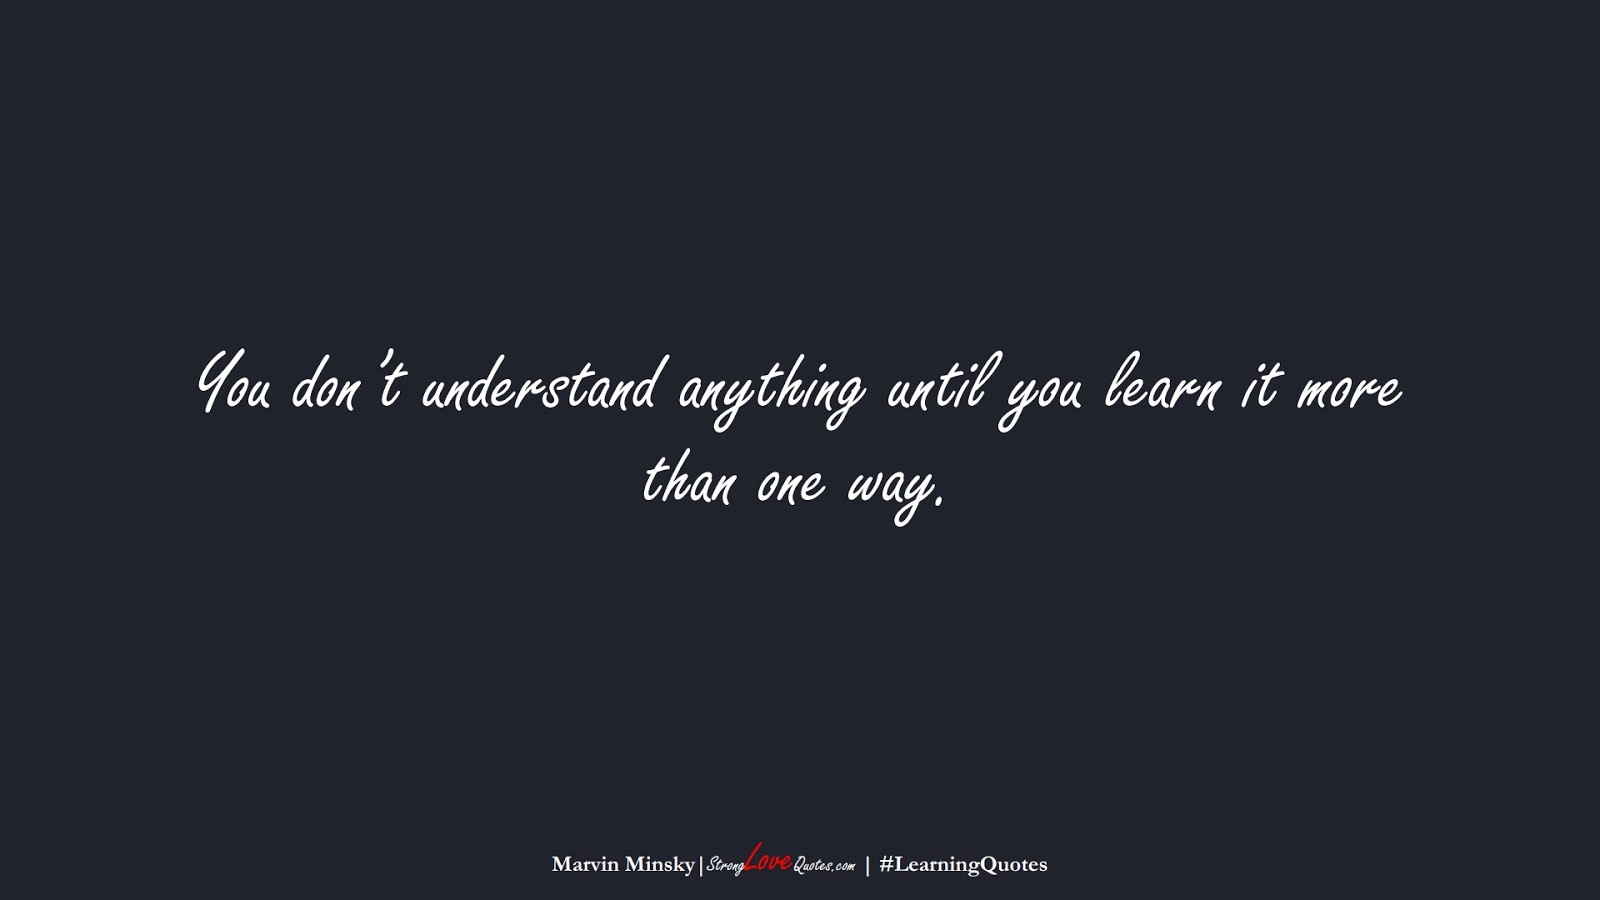 You don’t understand anything until you learn it more than one way. (Marvin Minsky);  #LearningQuotes